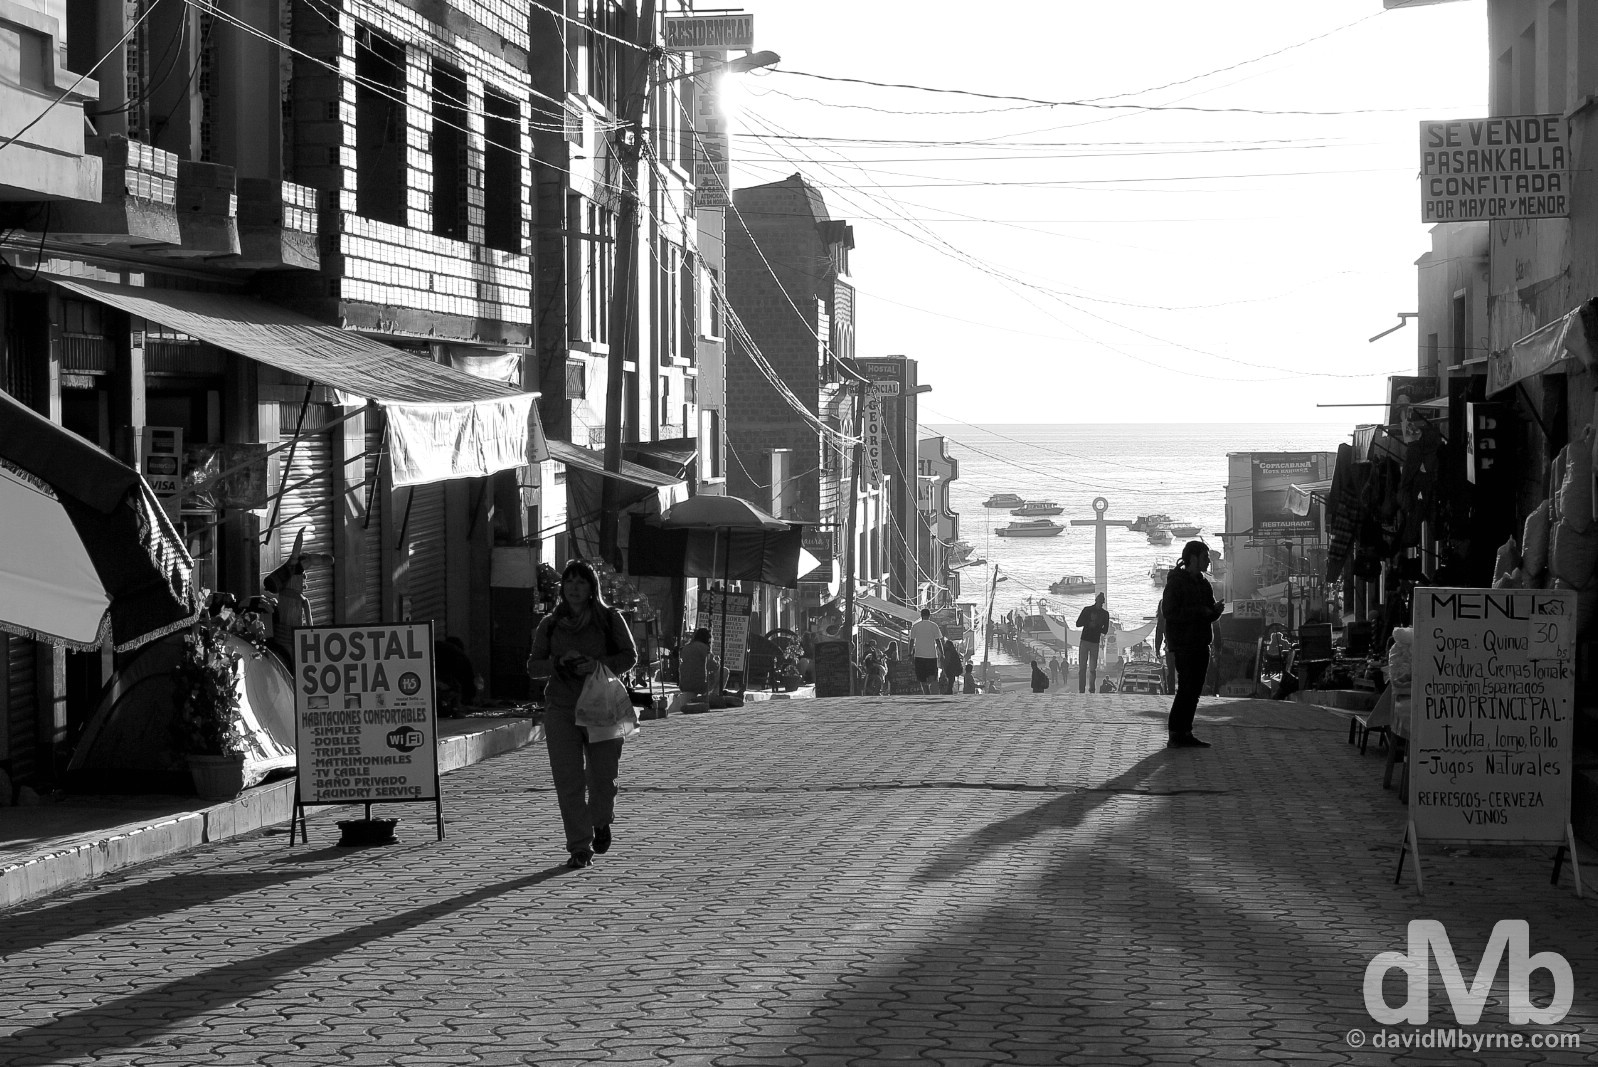 Late afternoon shadows on Avenue 6 de Agosto, tourist central in Copacabana, Bolivia. August 24, 2015. 